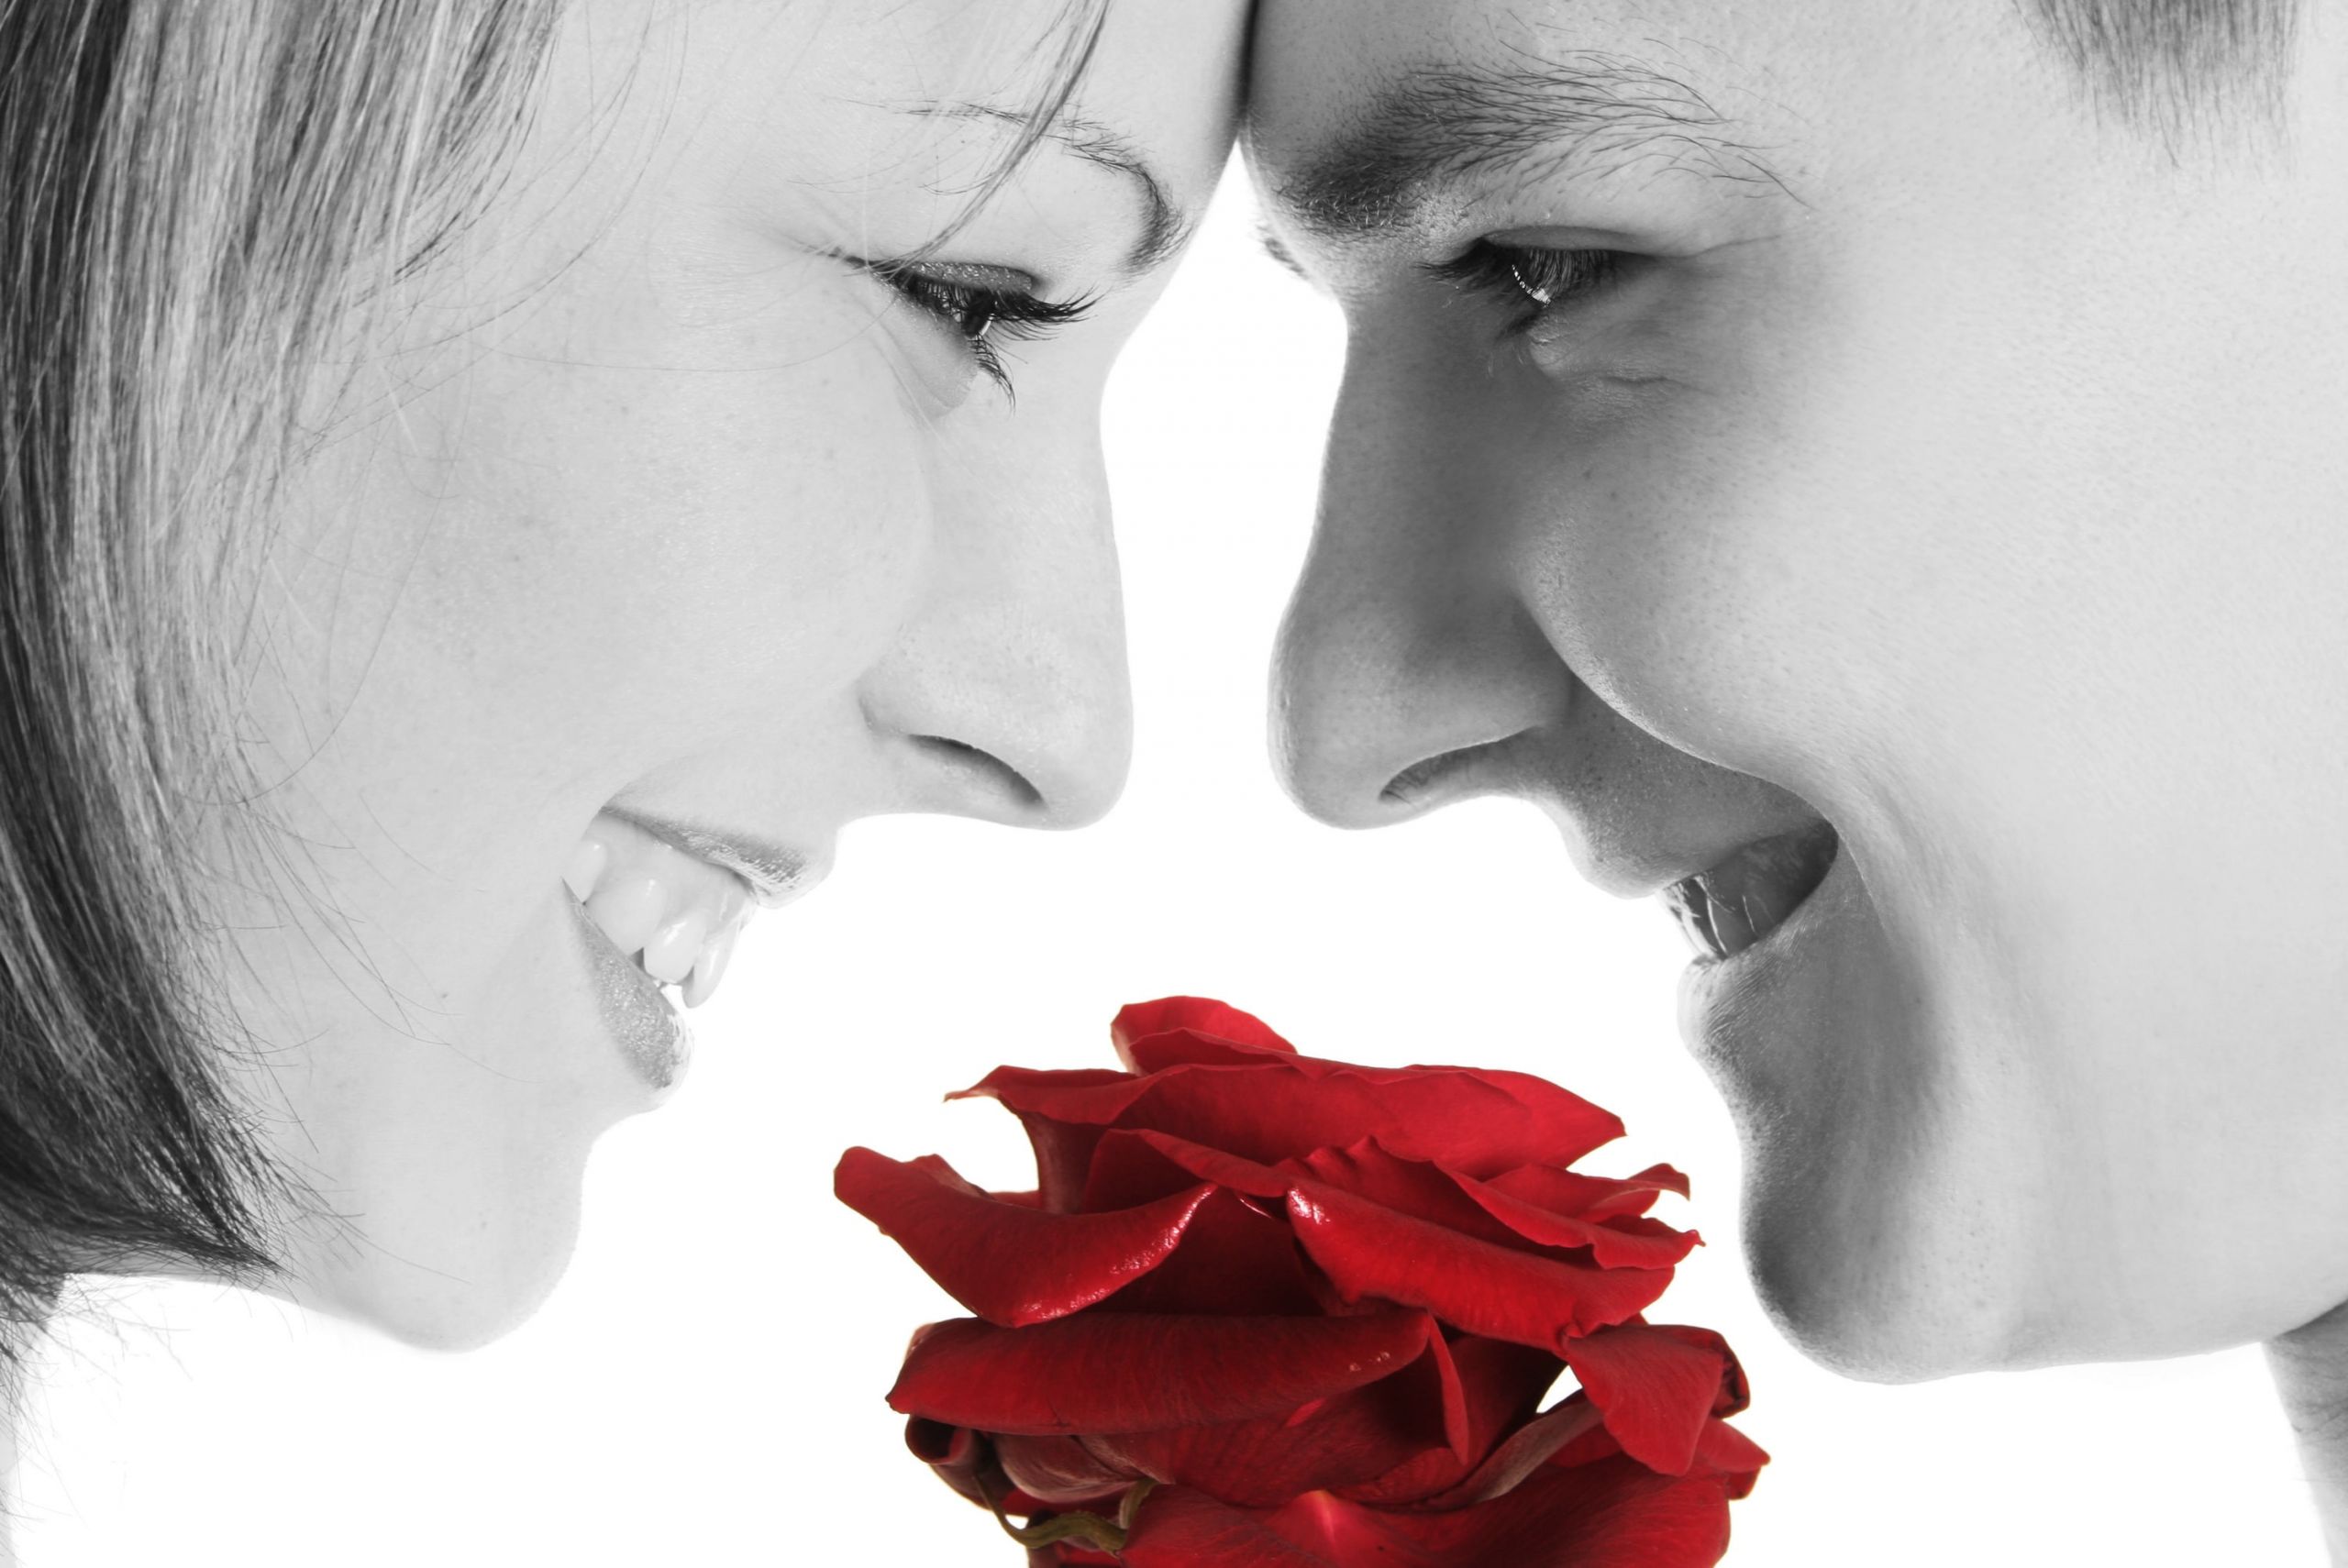 Girlfriend Gift Ideas Romantic
 10 Romantic & Inexpensive Gift Ideas for Your Girlfriend